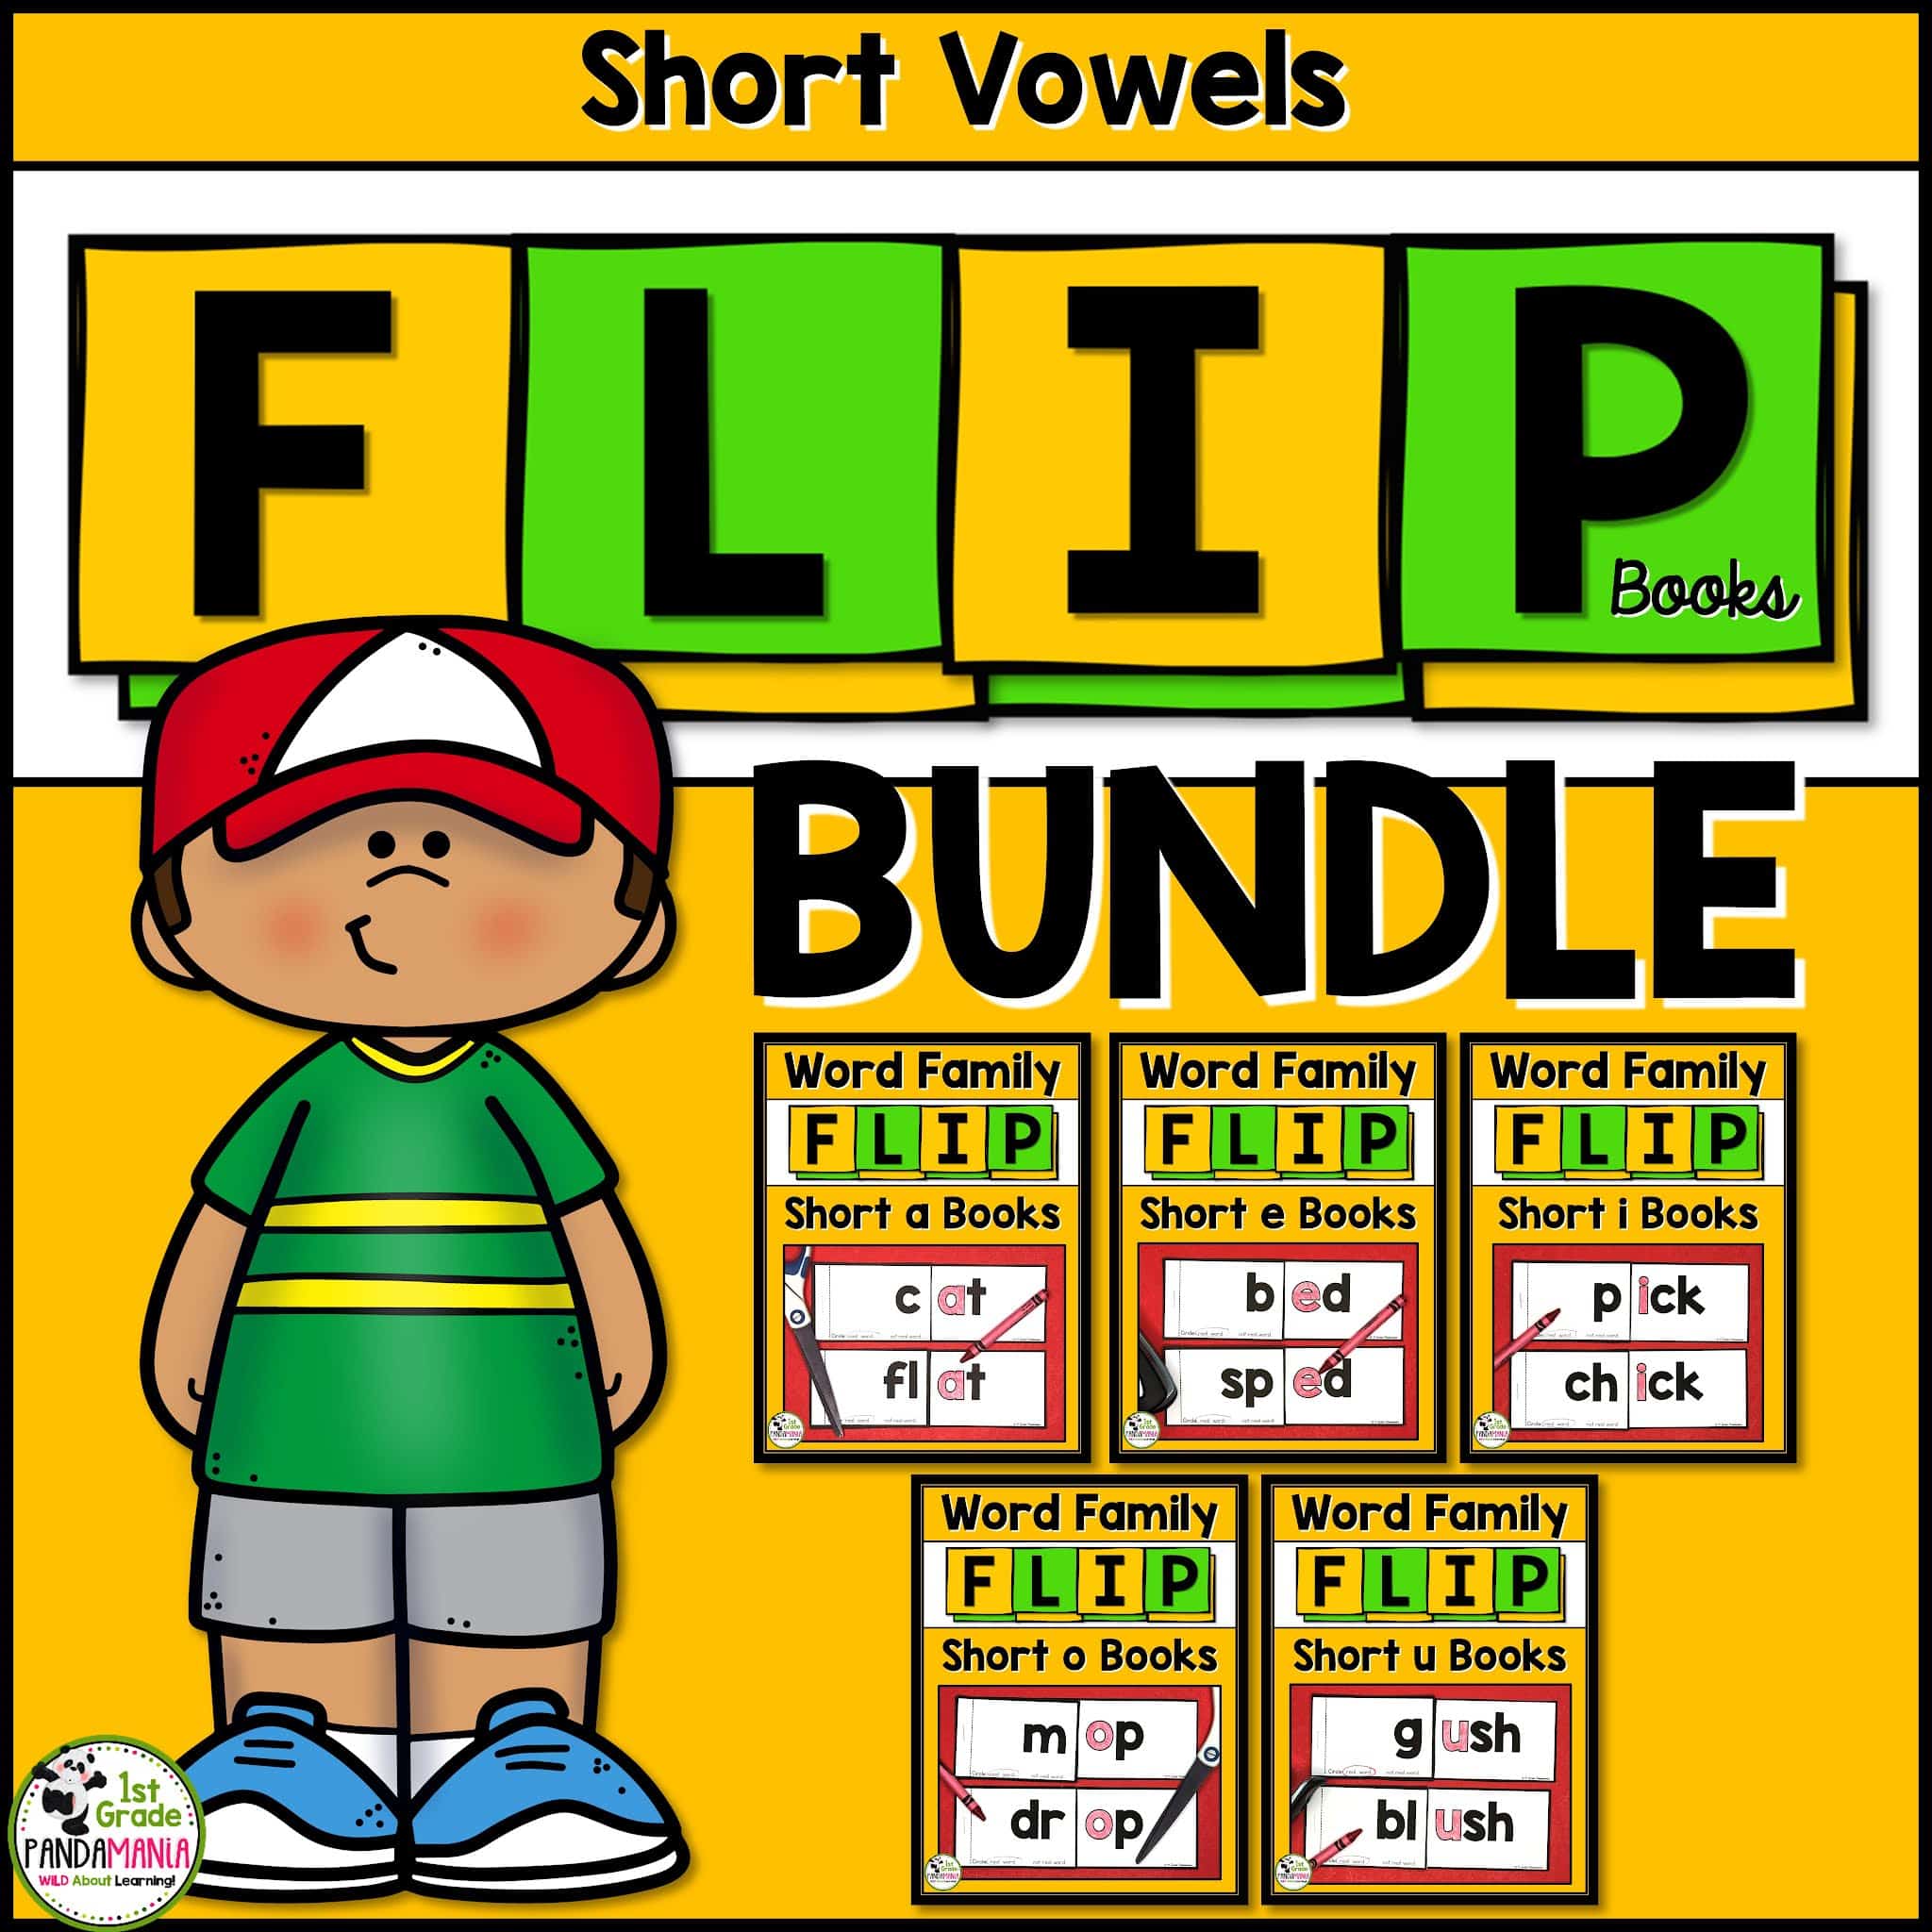 Easy to Make One-Page Word Family FLIP Books! 4